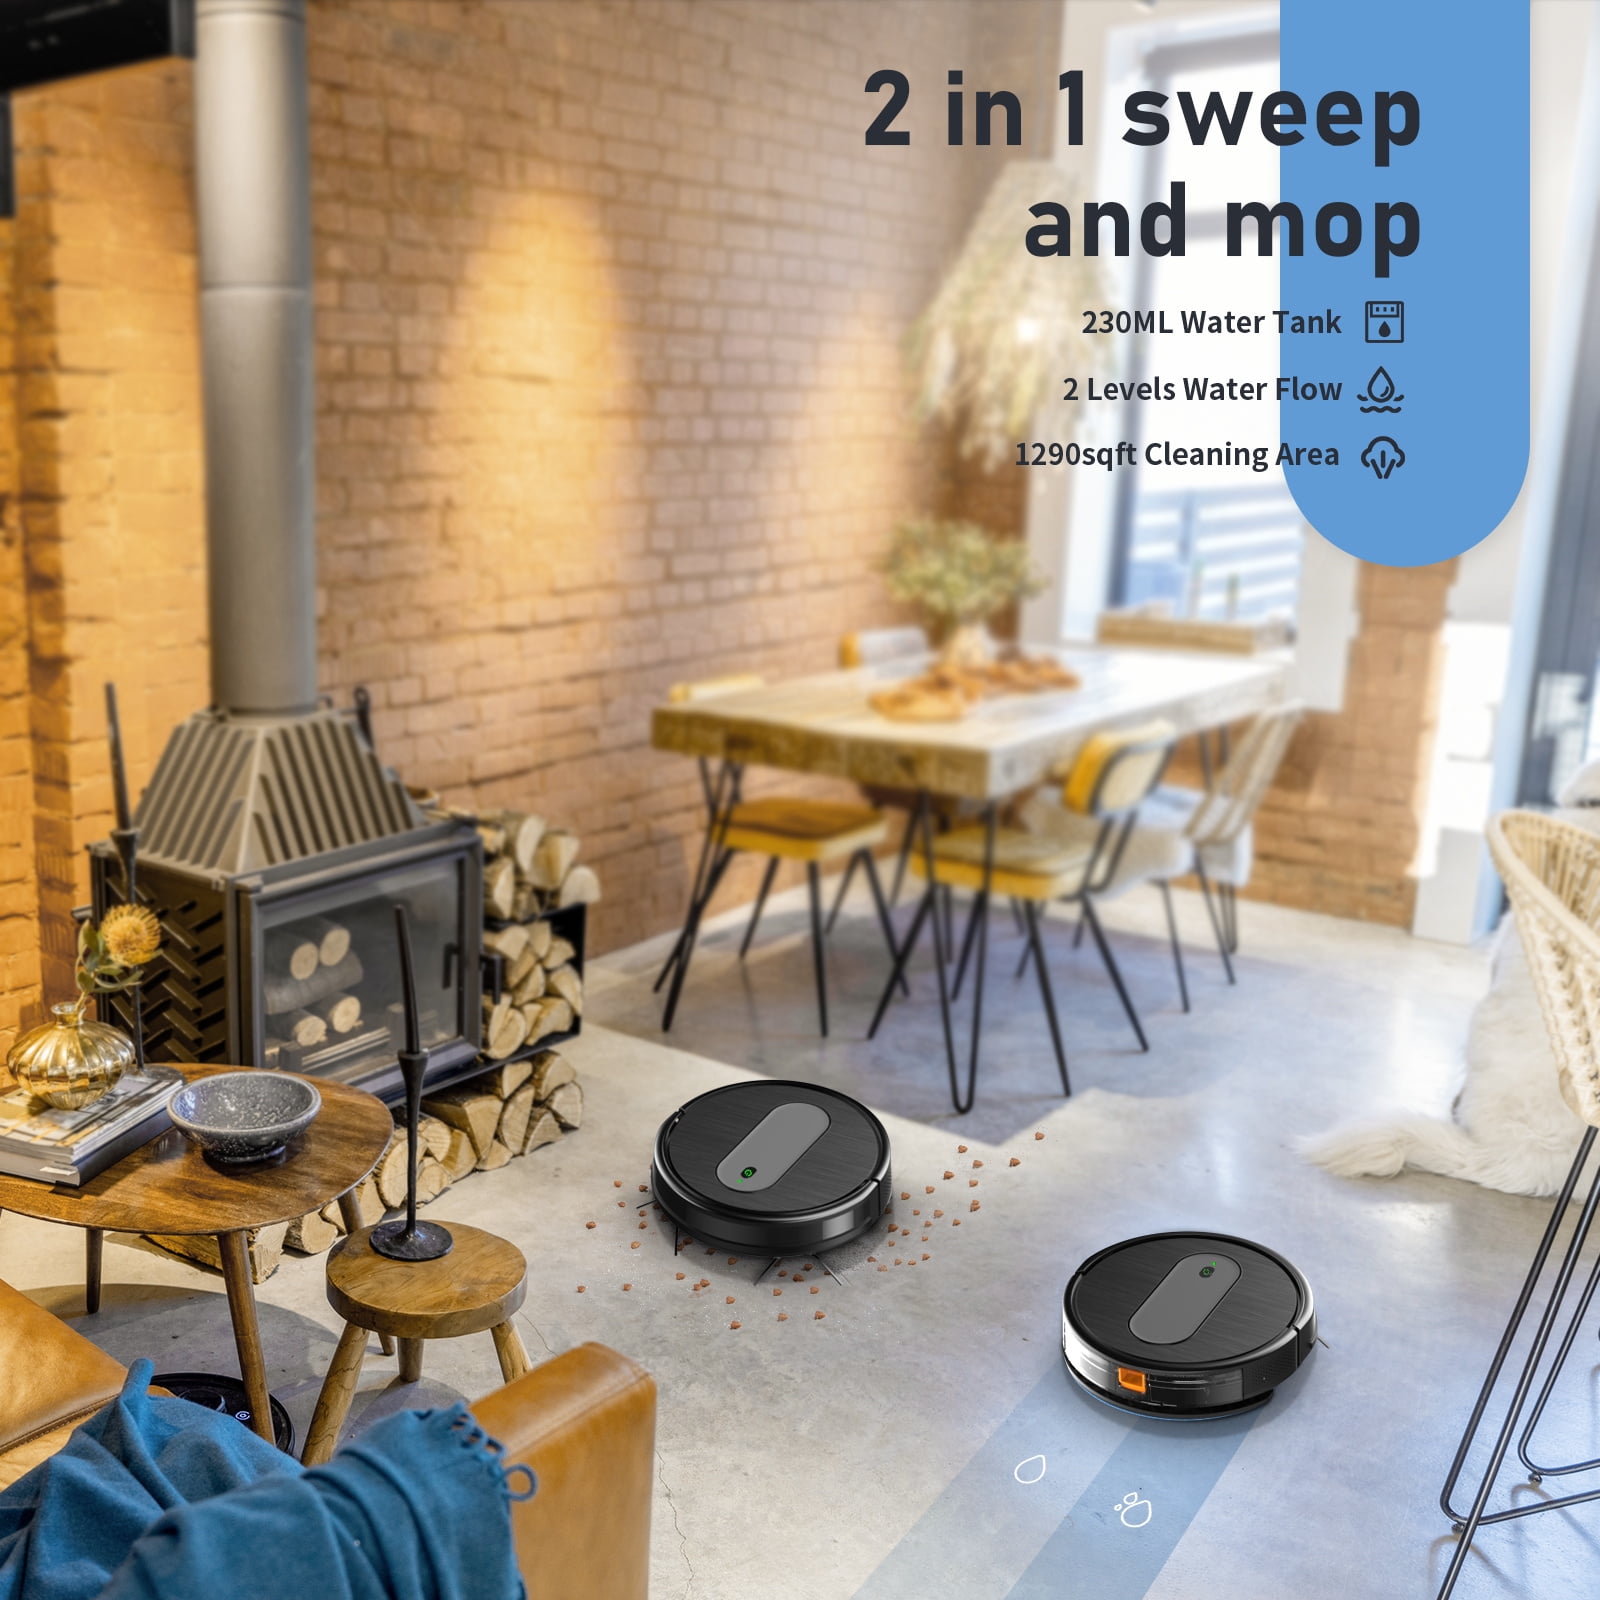 App//Wi-Fi/Alexa, combo Slim, Floor, 3 Hair with Cleaner, Mopping Pet Hard 1600Pa, vacuum Robot ONSON in for mop Robot Schedule, and Vacuum Ideal 1